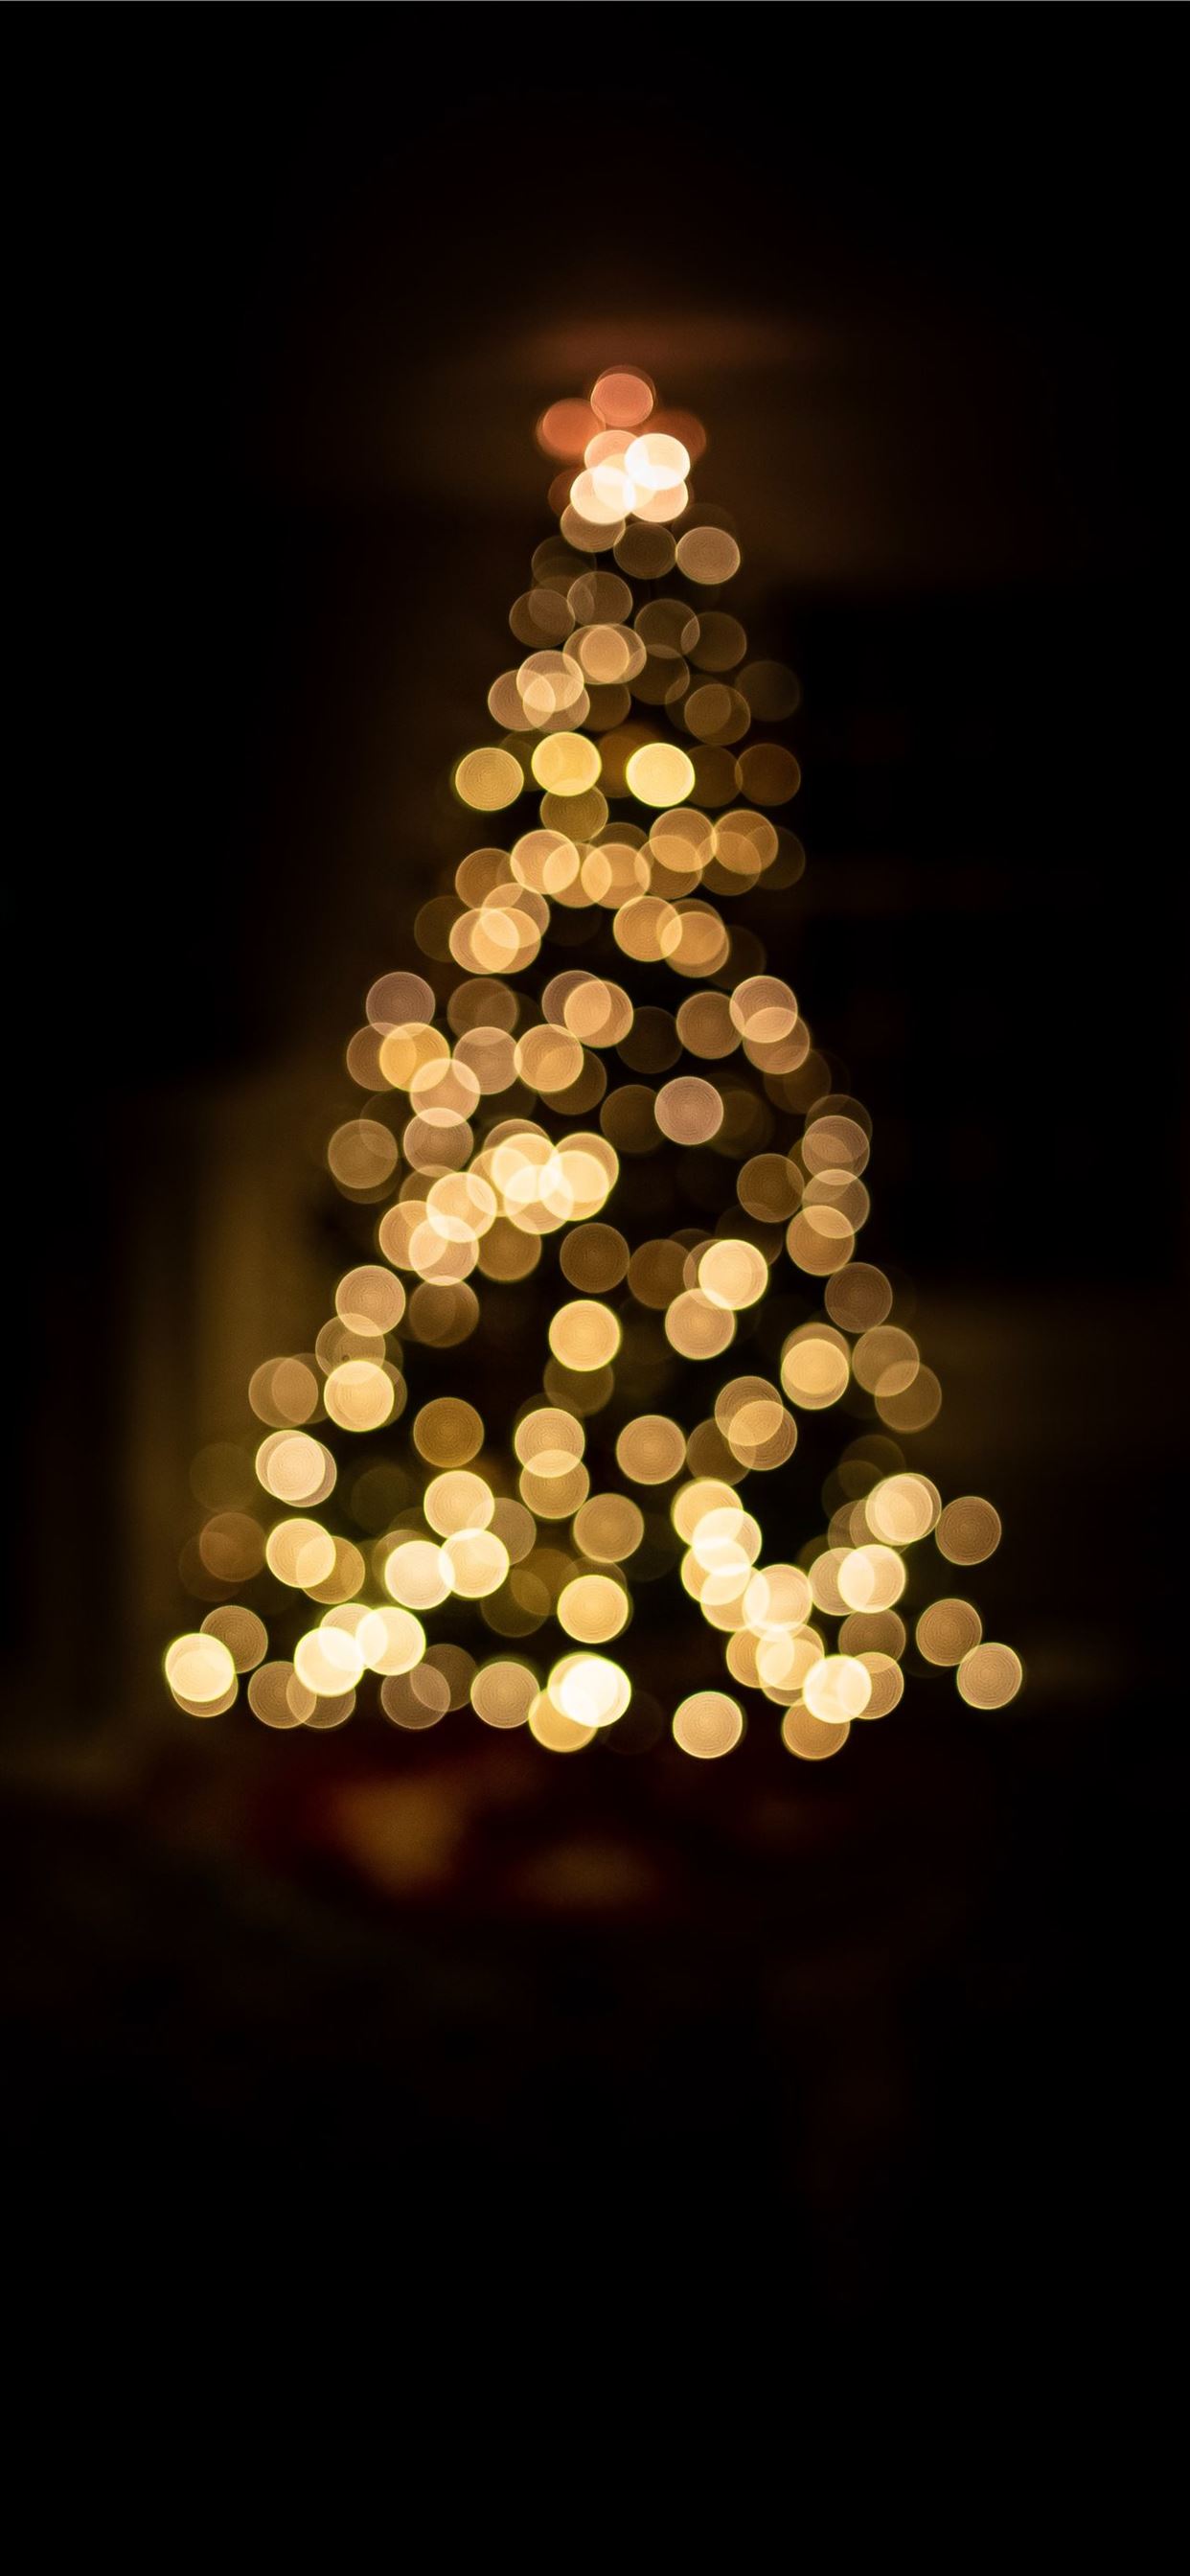 lighted Christmas tree iPhone Wallpaper Free Download